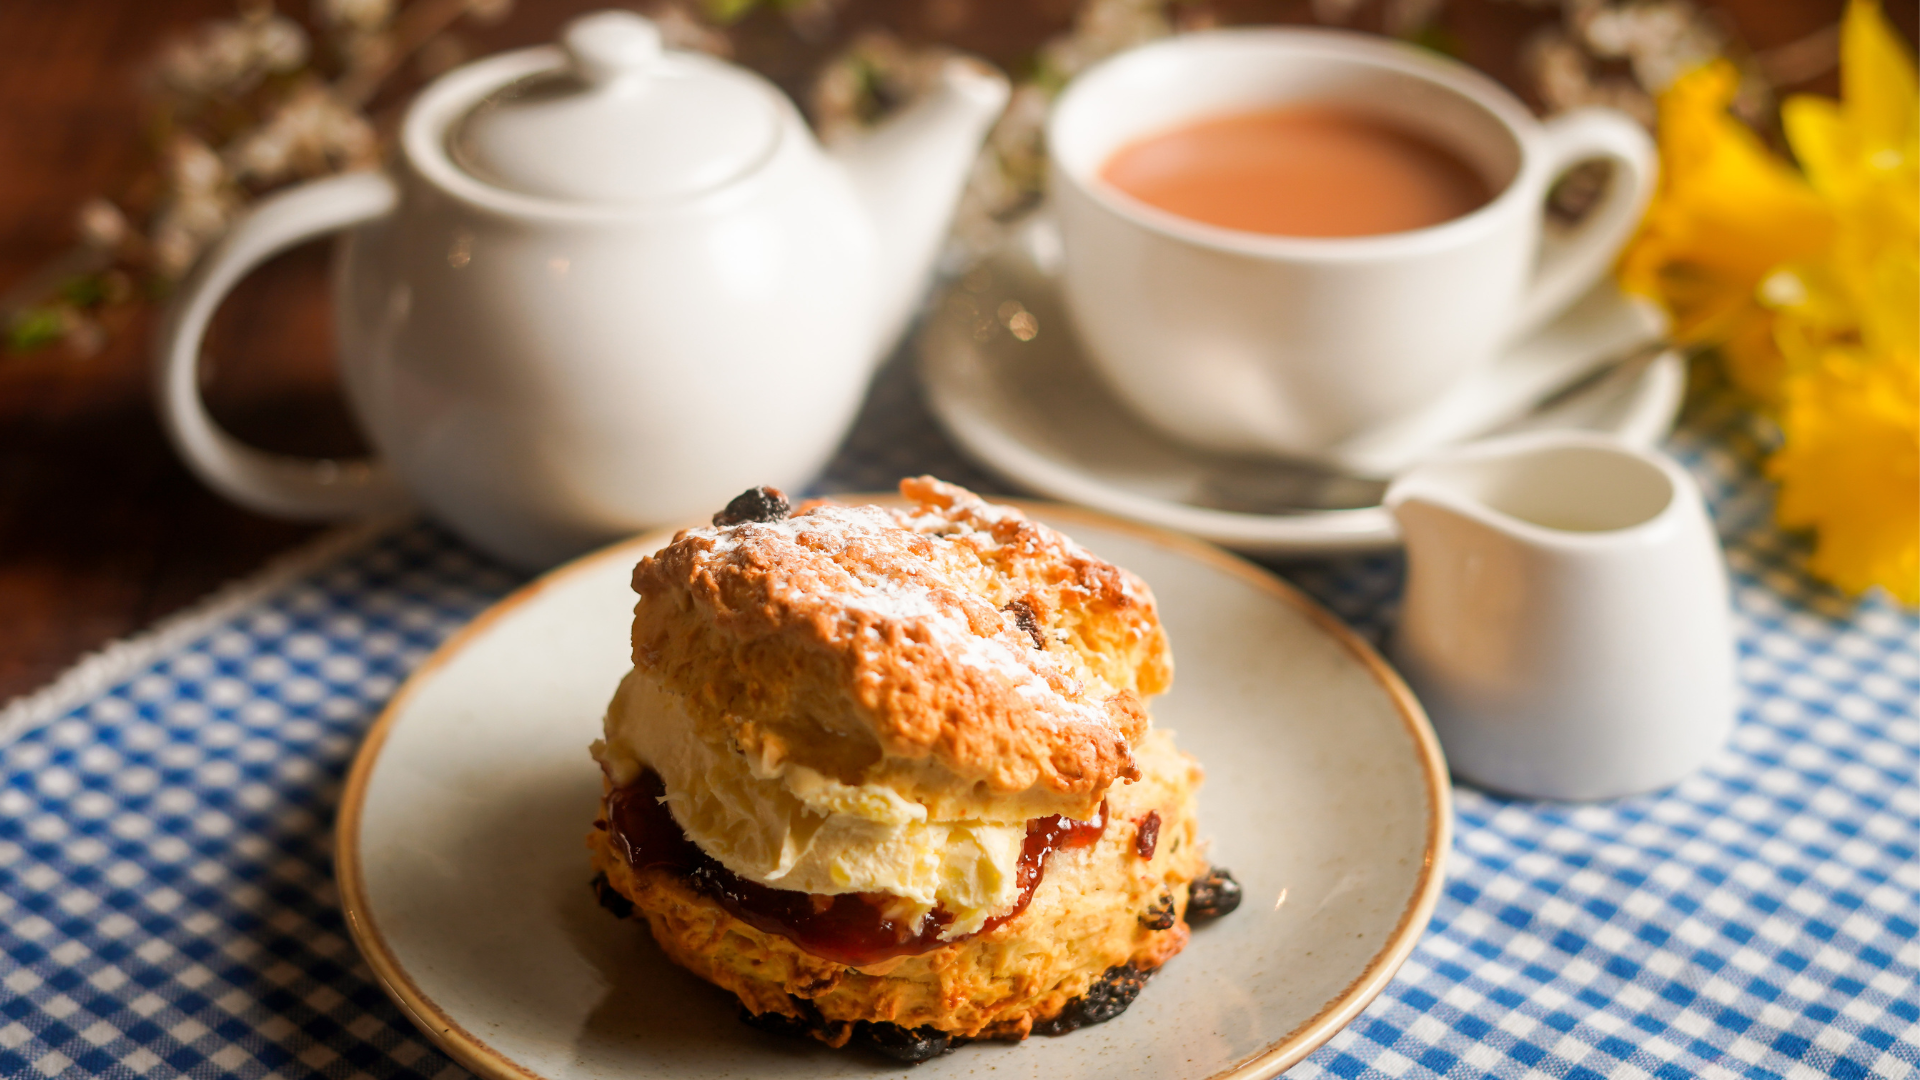 Fruit Scone with Cream and Jam on table with pot of tea and cup